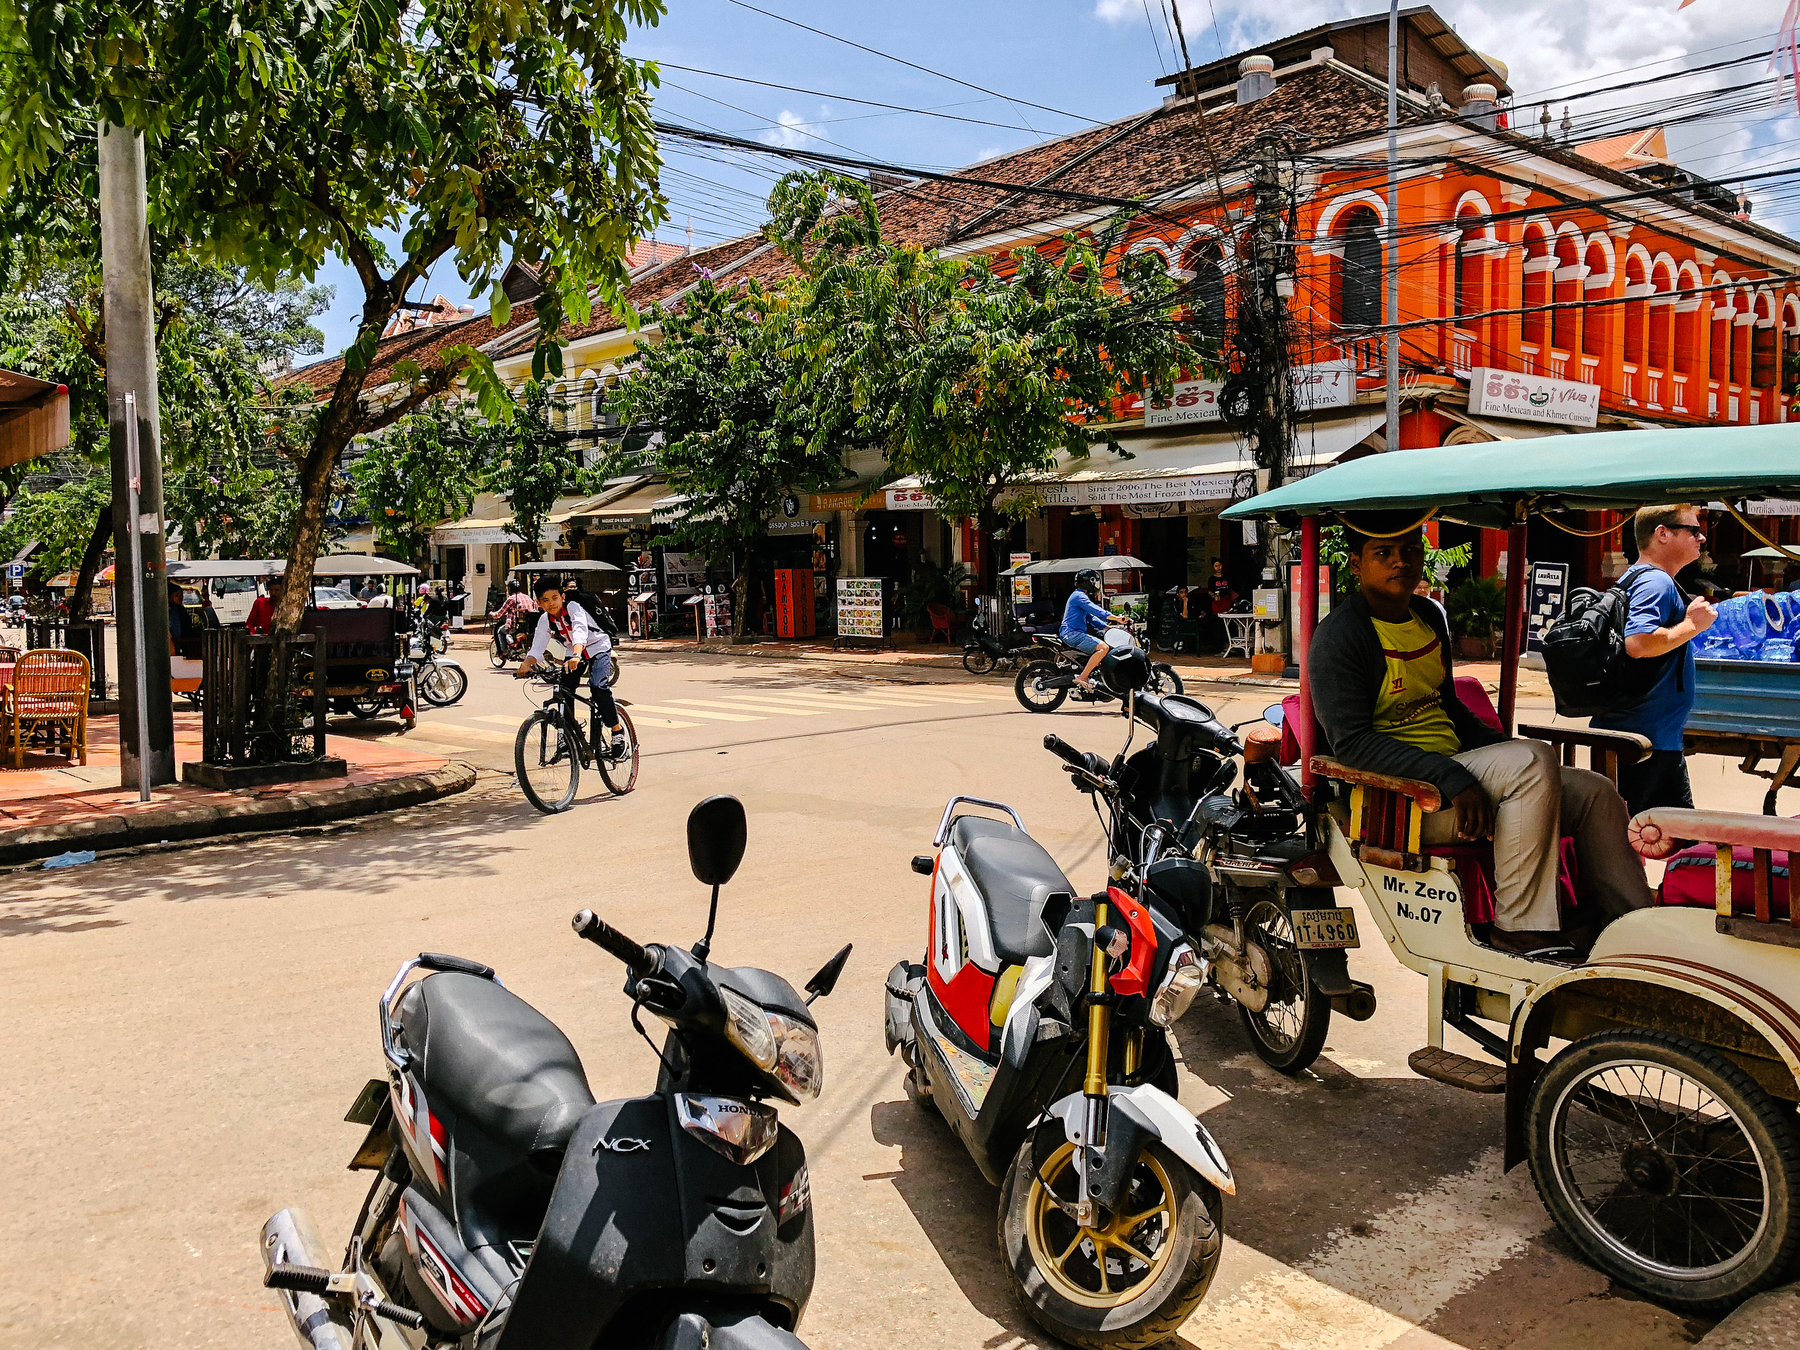 city scene, tuk tuk, bicycles, and people going about